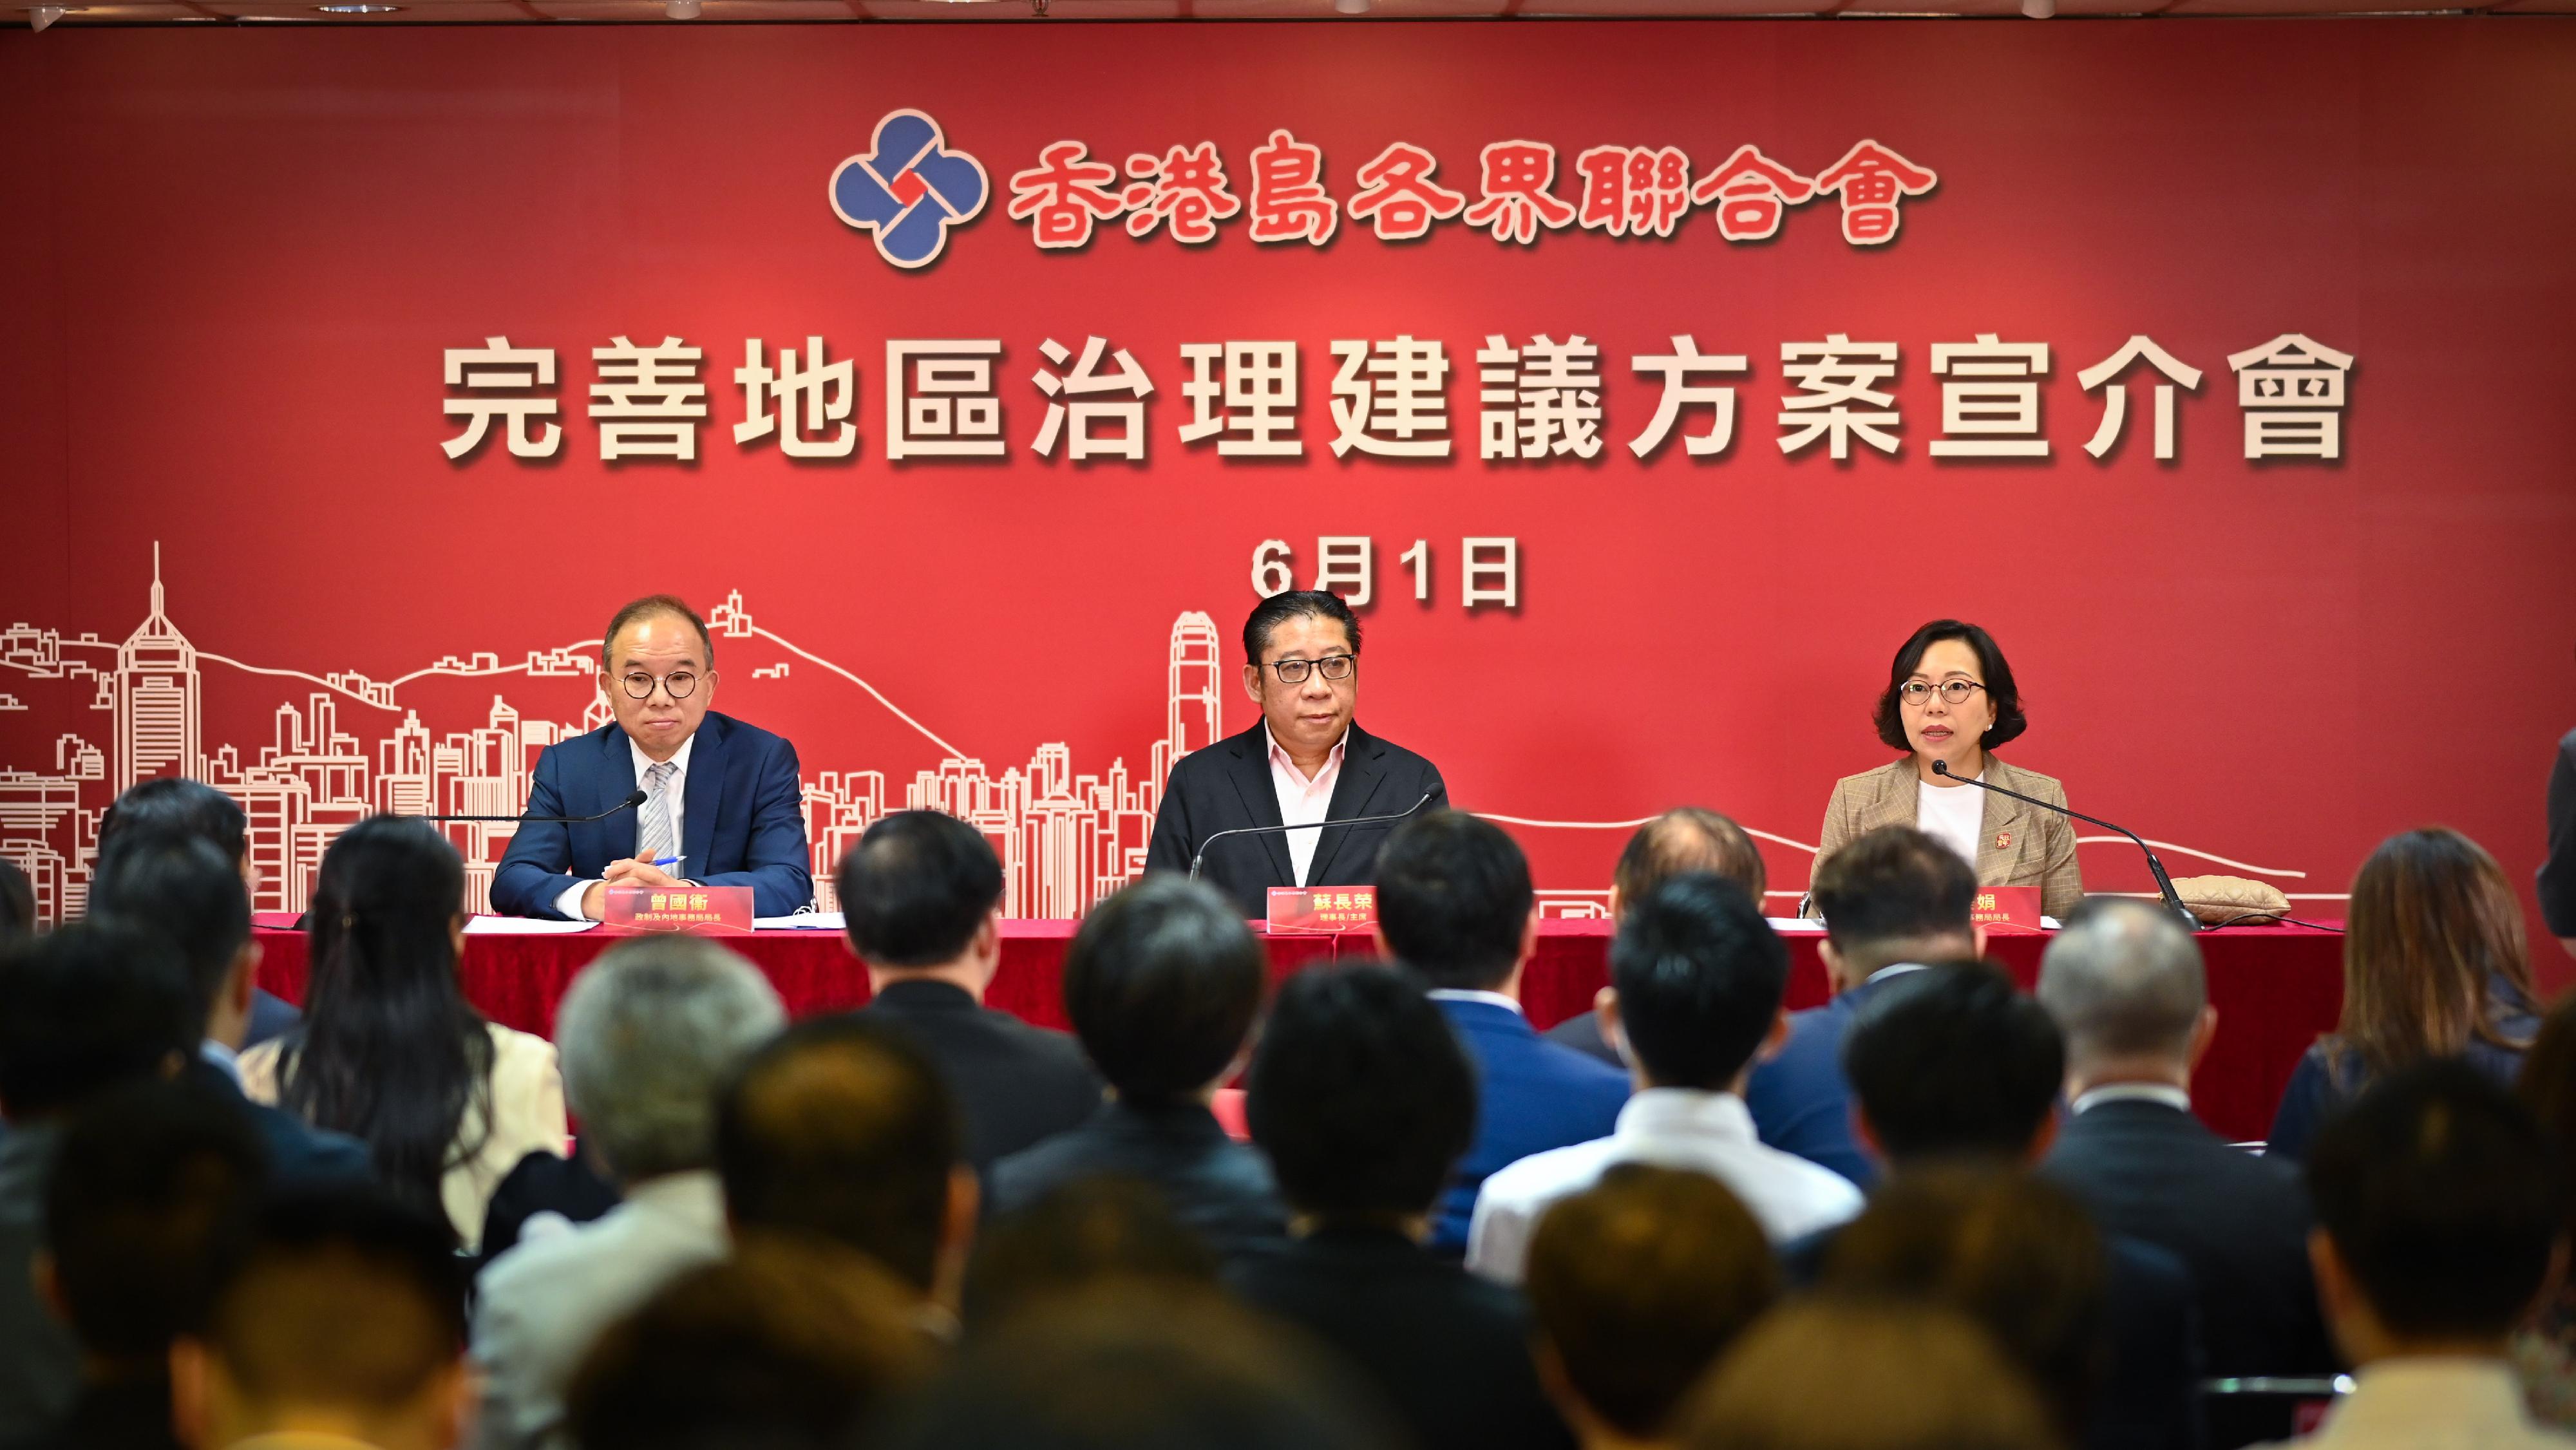 The Secretary for Constitutional and Mainland Affairs, Mr Erick Tsang Kwok-wai (left), and the Secretary for Home and Youth Affairs, Miss Alice Mak (right), met with representatives of the Hong Kong Island Federation to explain the proposals on improving governance at the district level today (June 1).